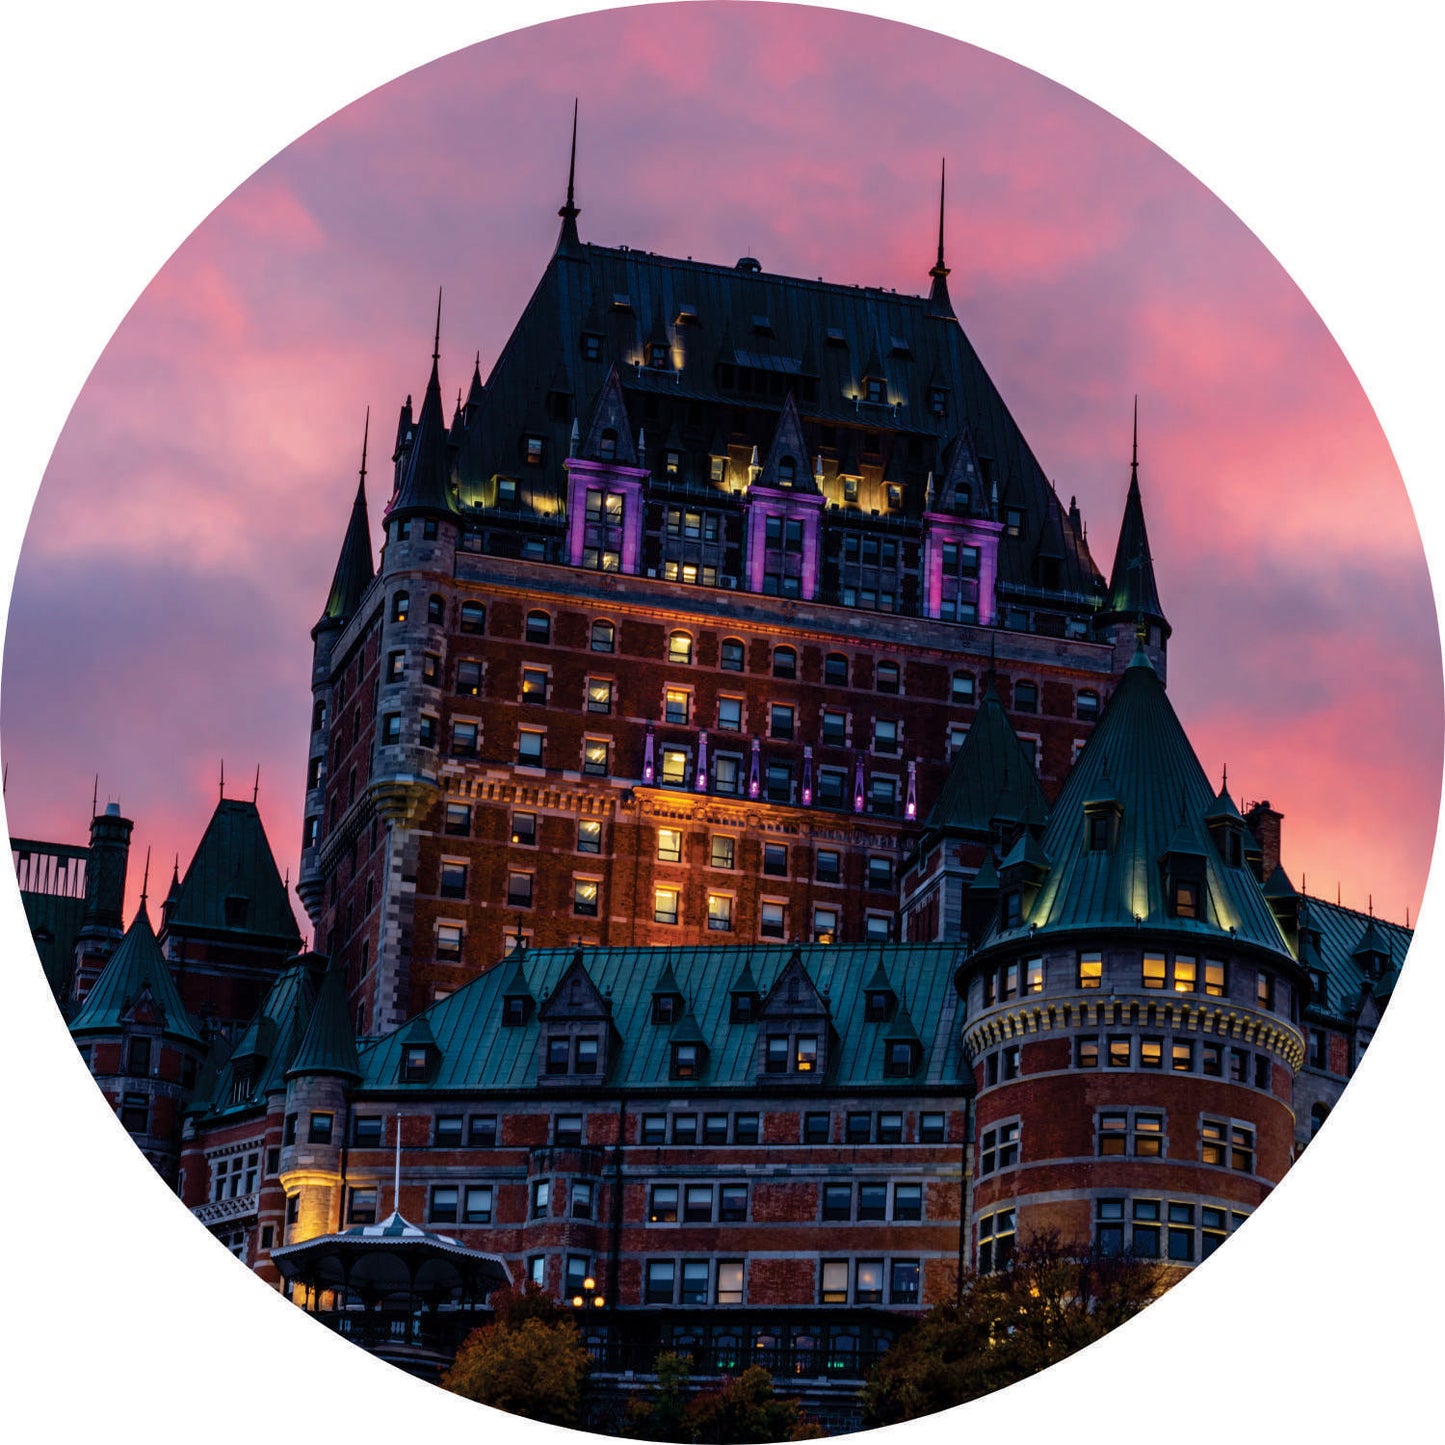 064-Wall clock with neon - Quebec Chateau Frontenac